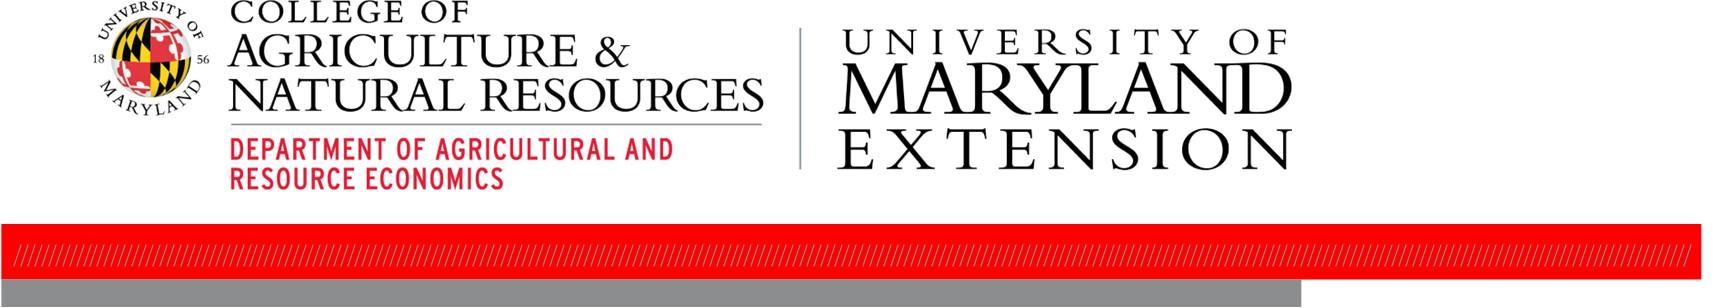 College of Agriculture and Natural Resources and University of Maryland Extension Logos